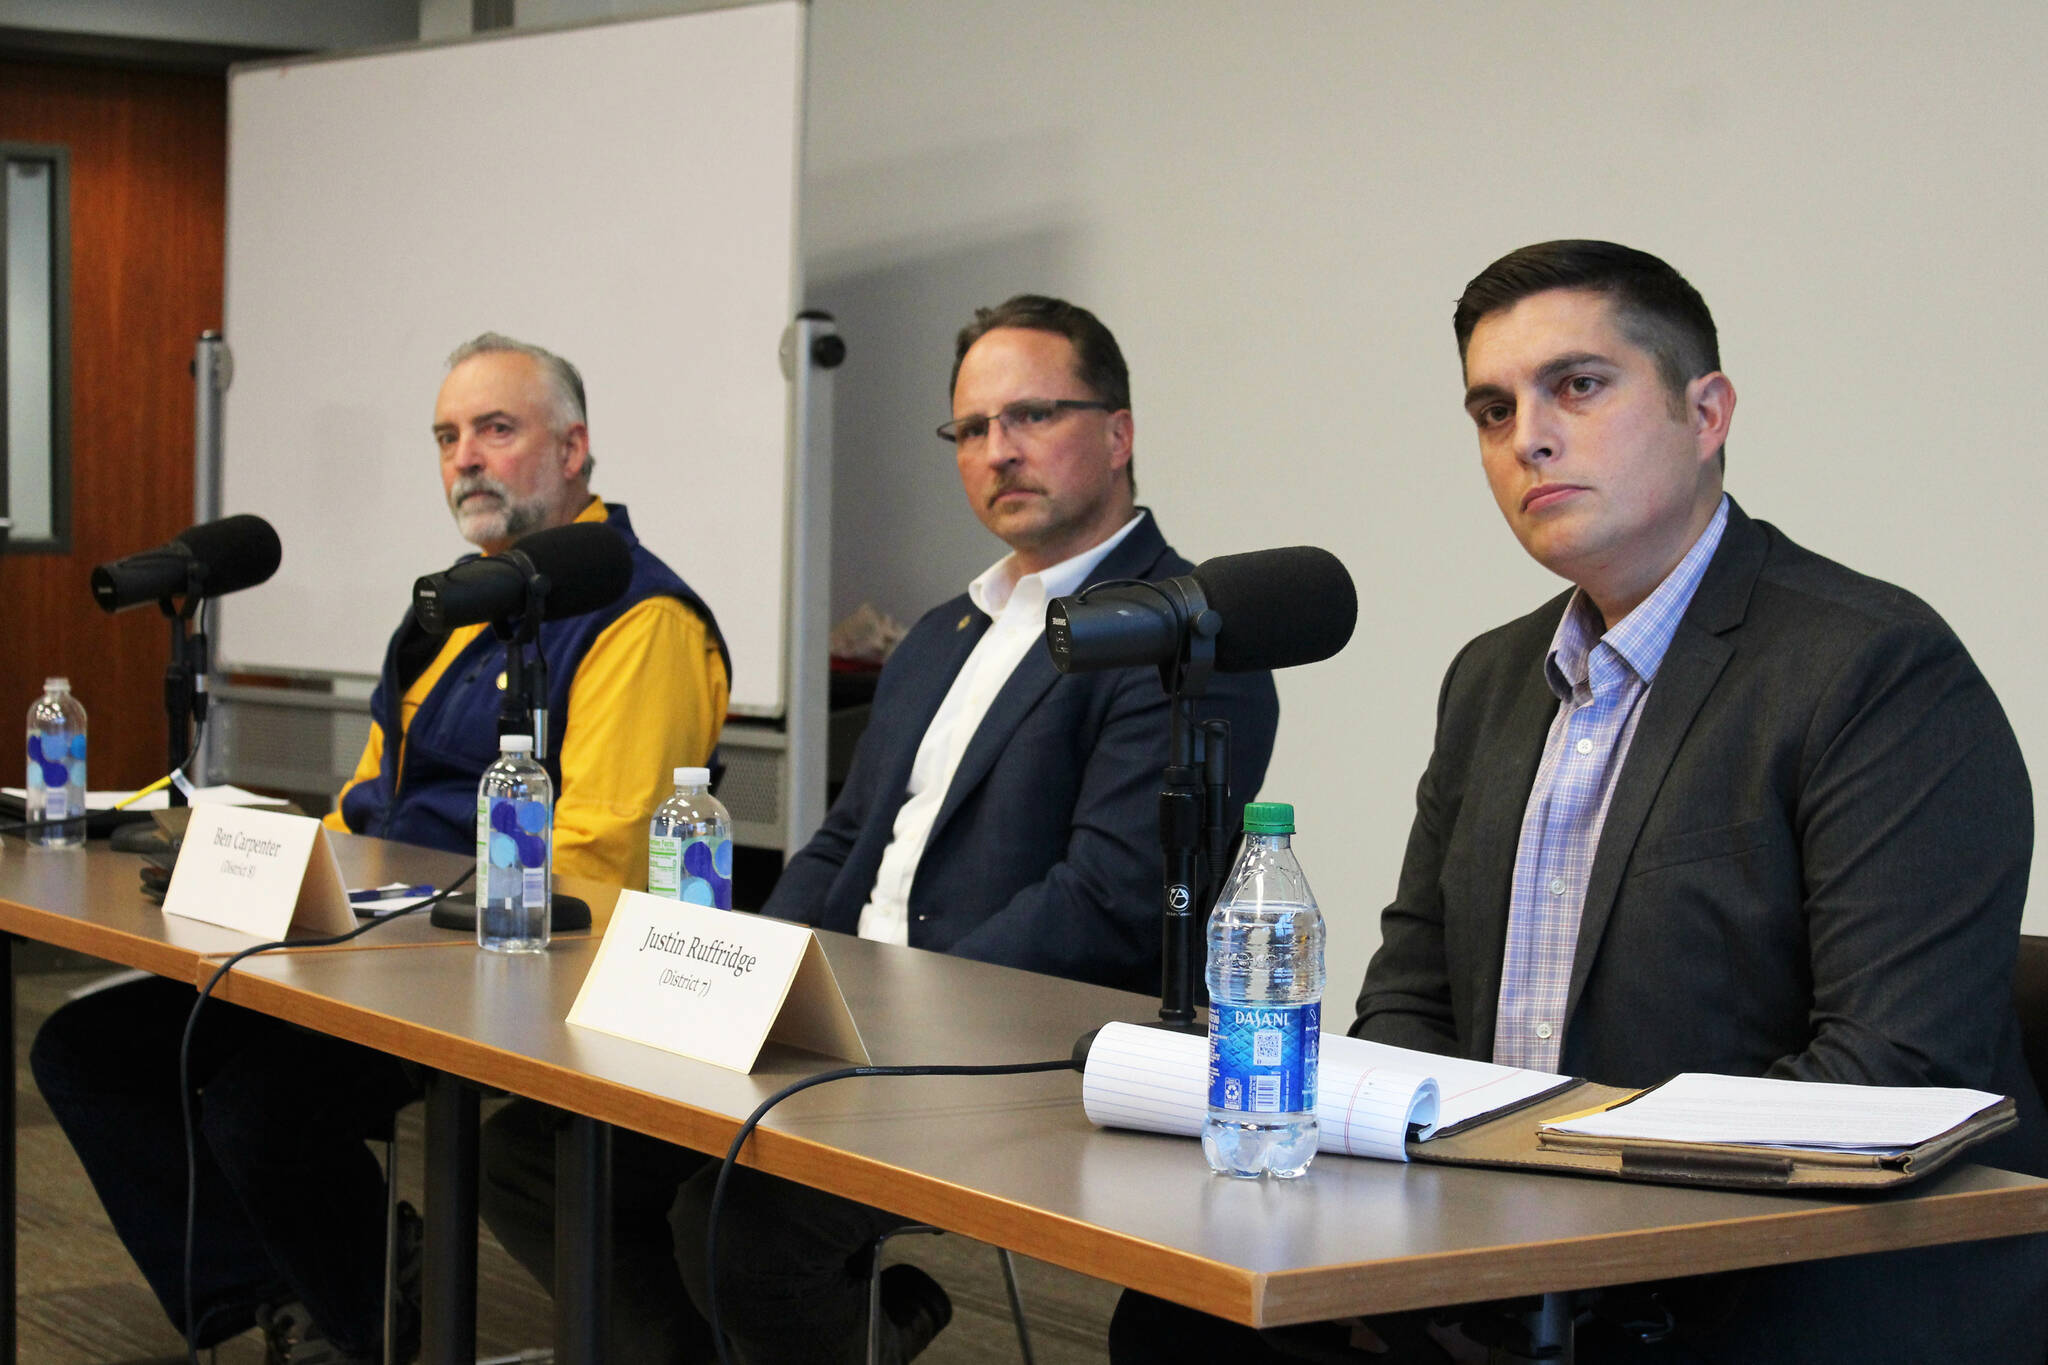 From left: Alaska State House candidates Ron Gillham, Ben Carpenter and Justin Ruffridge participate in a candidate forum on Monday, Oct. 10, 2022 in Soldotna, Alaska. (Ashlyn O’Hara/Peninsula Clarion)